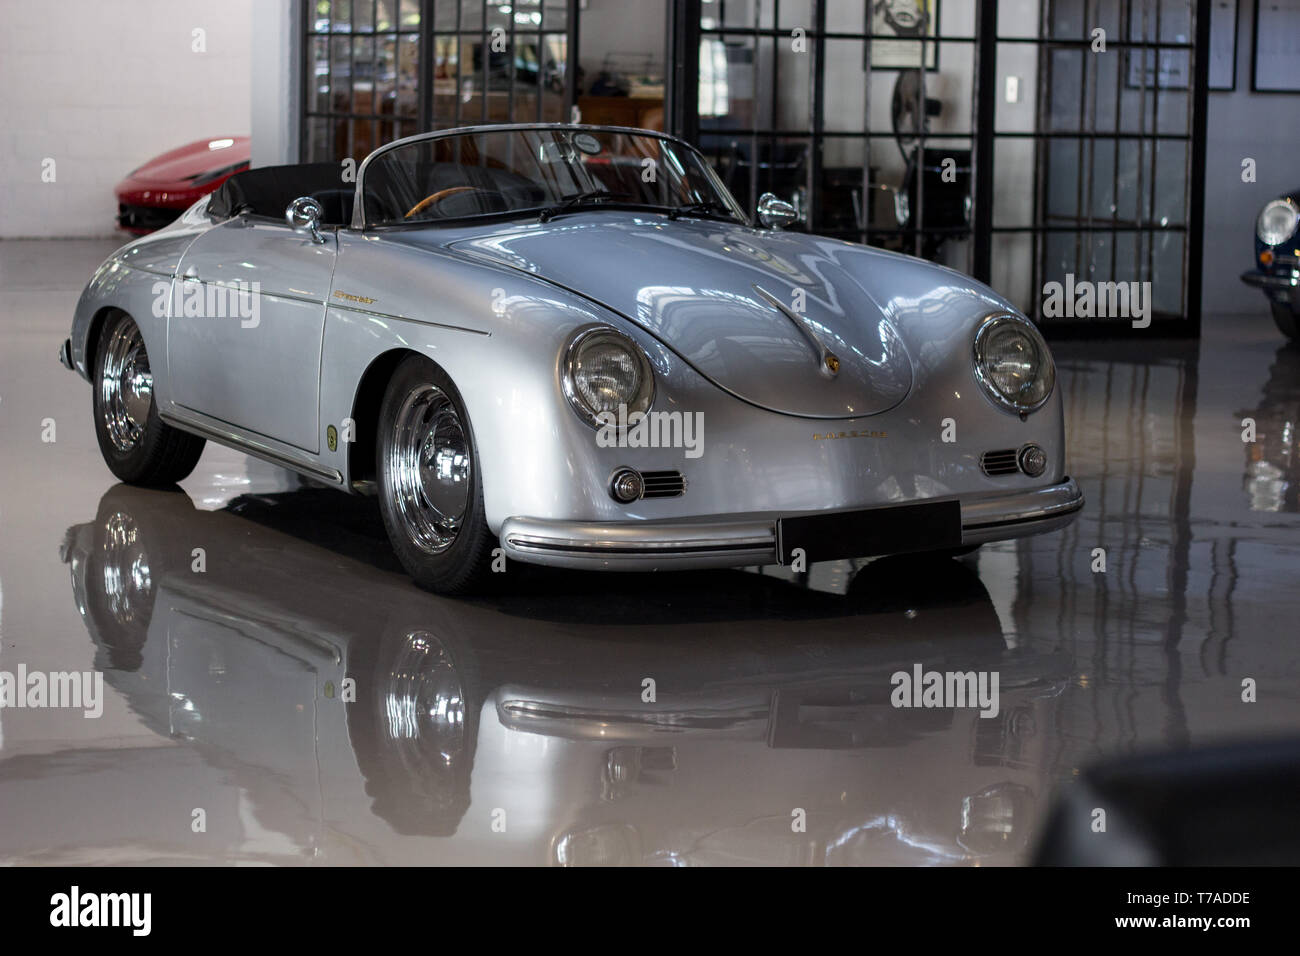 Cape Town, South Africa. 05 May 2019. A Vintage Porsche 356 Speedster parked inside a building. Stock Photo